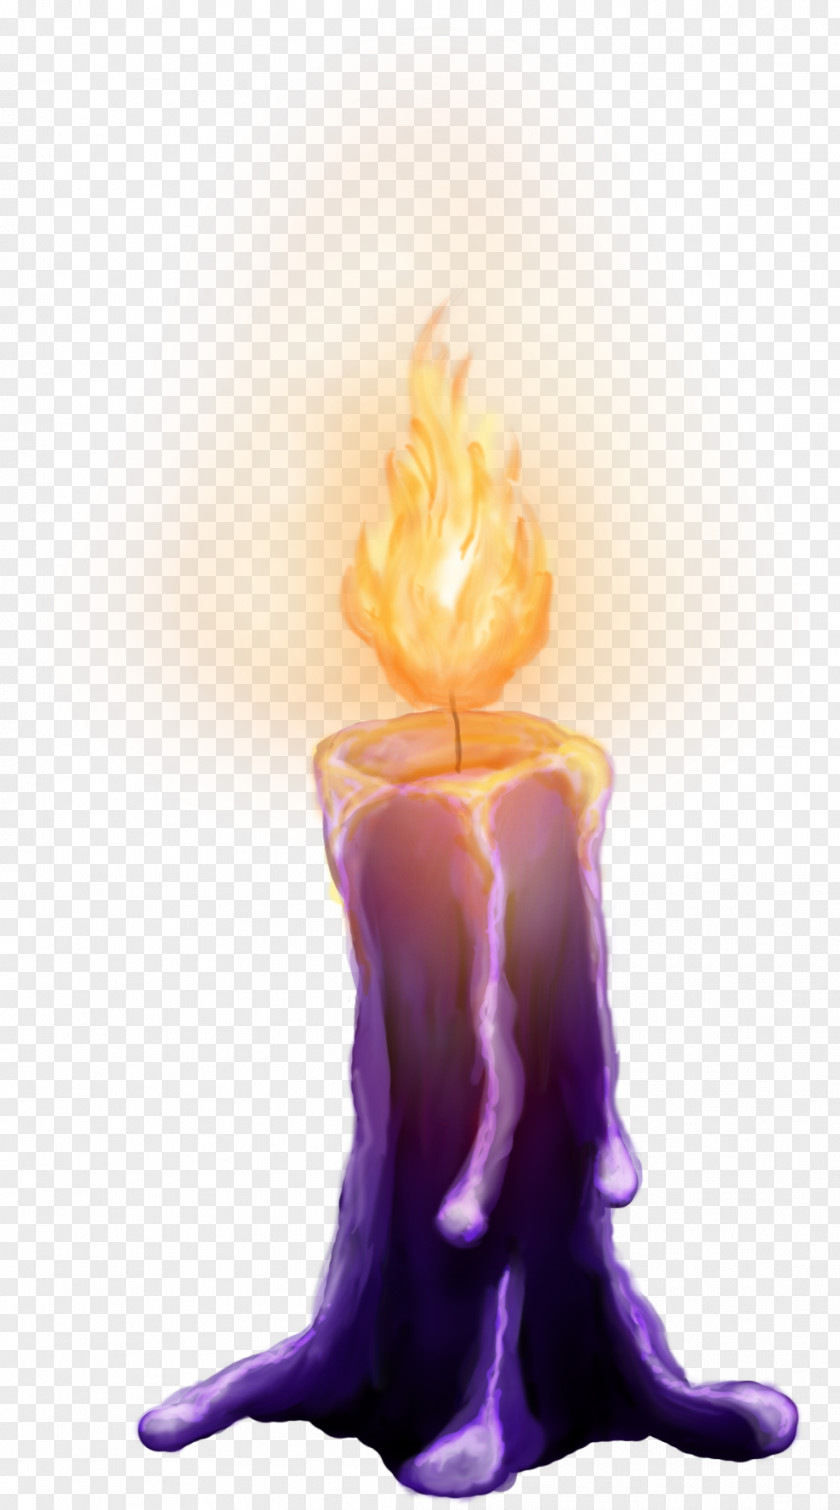 Burning Candles Candle Halloween Christmas Decoration Clip Art PNG